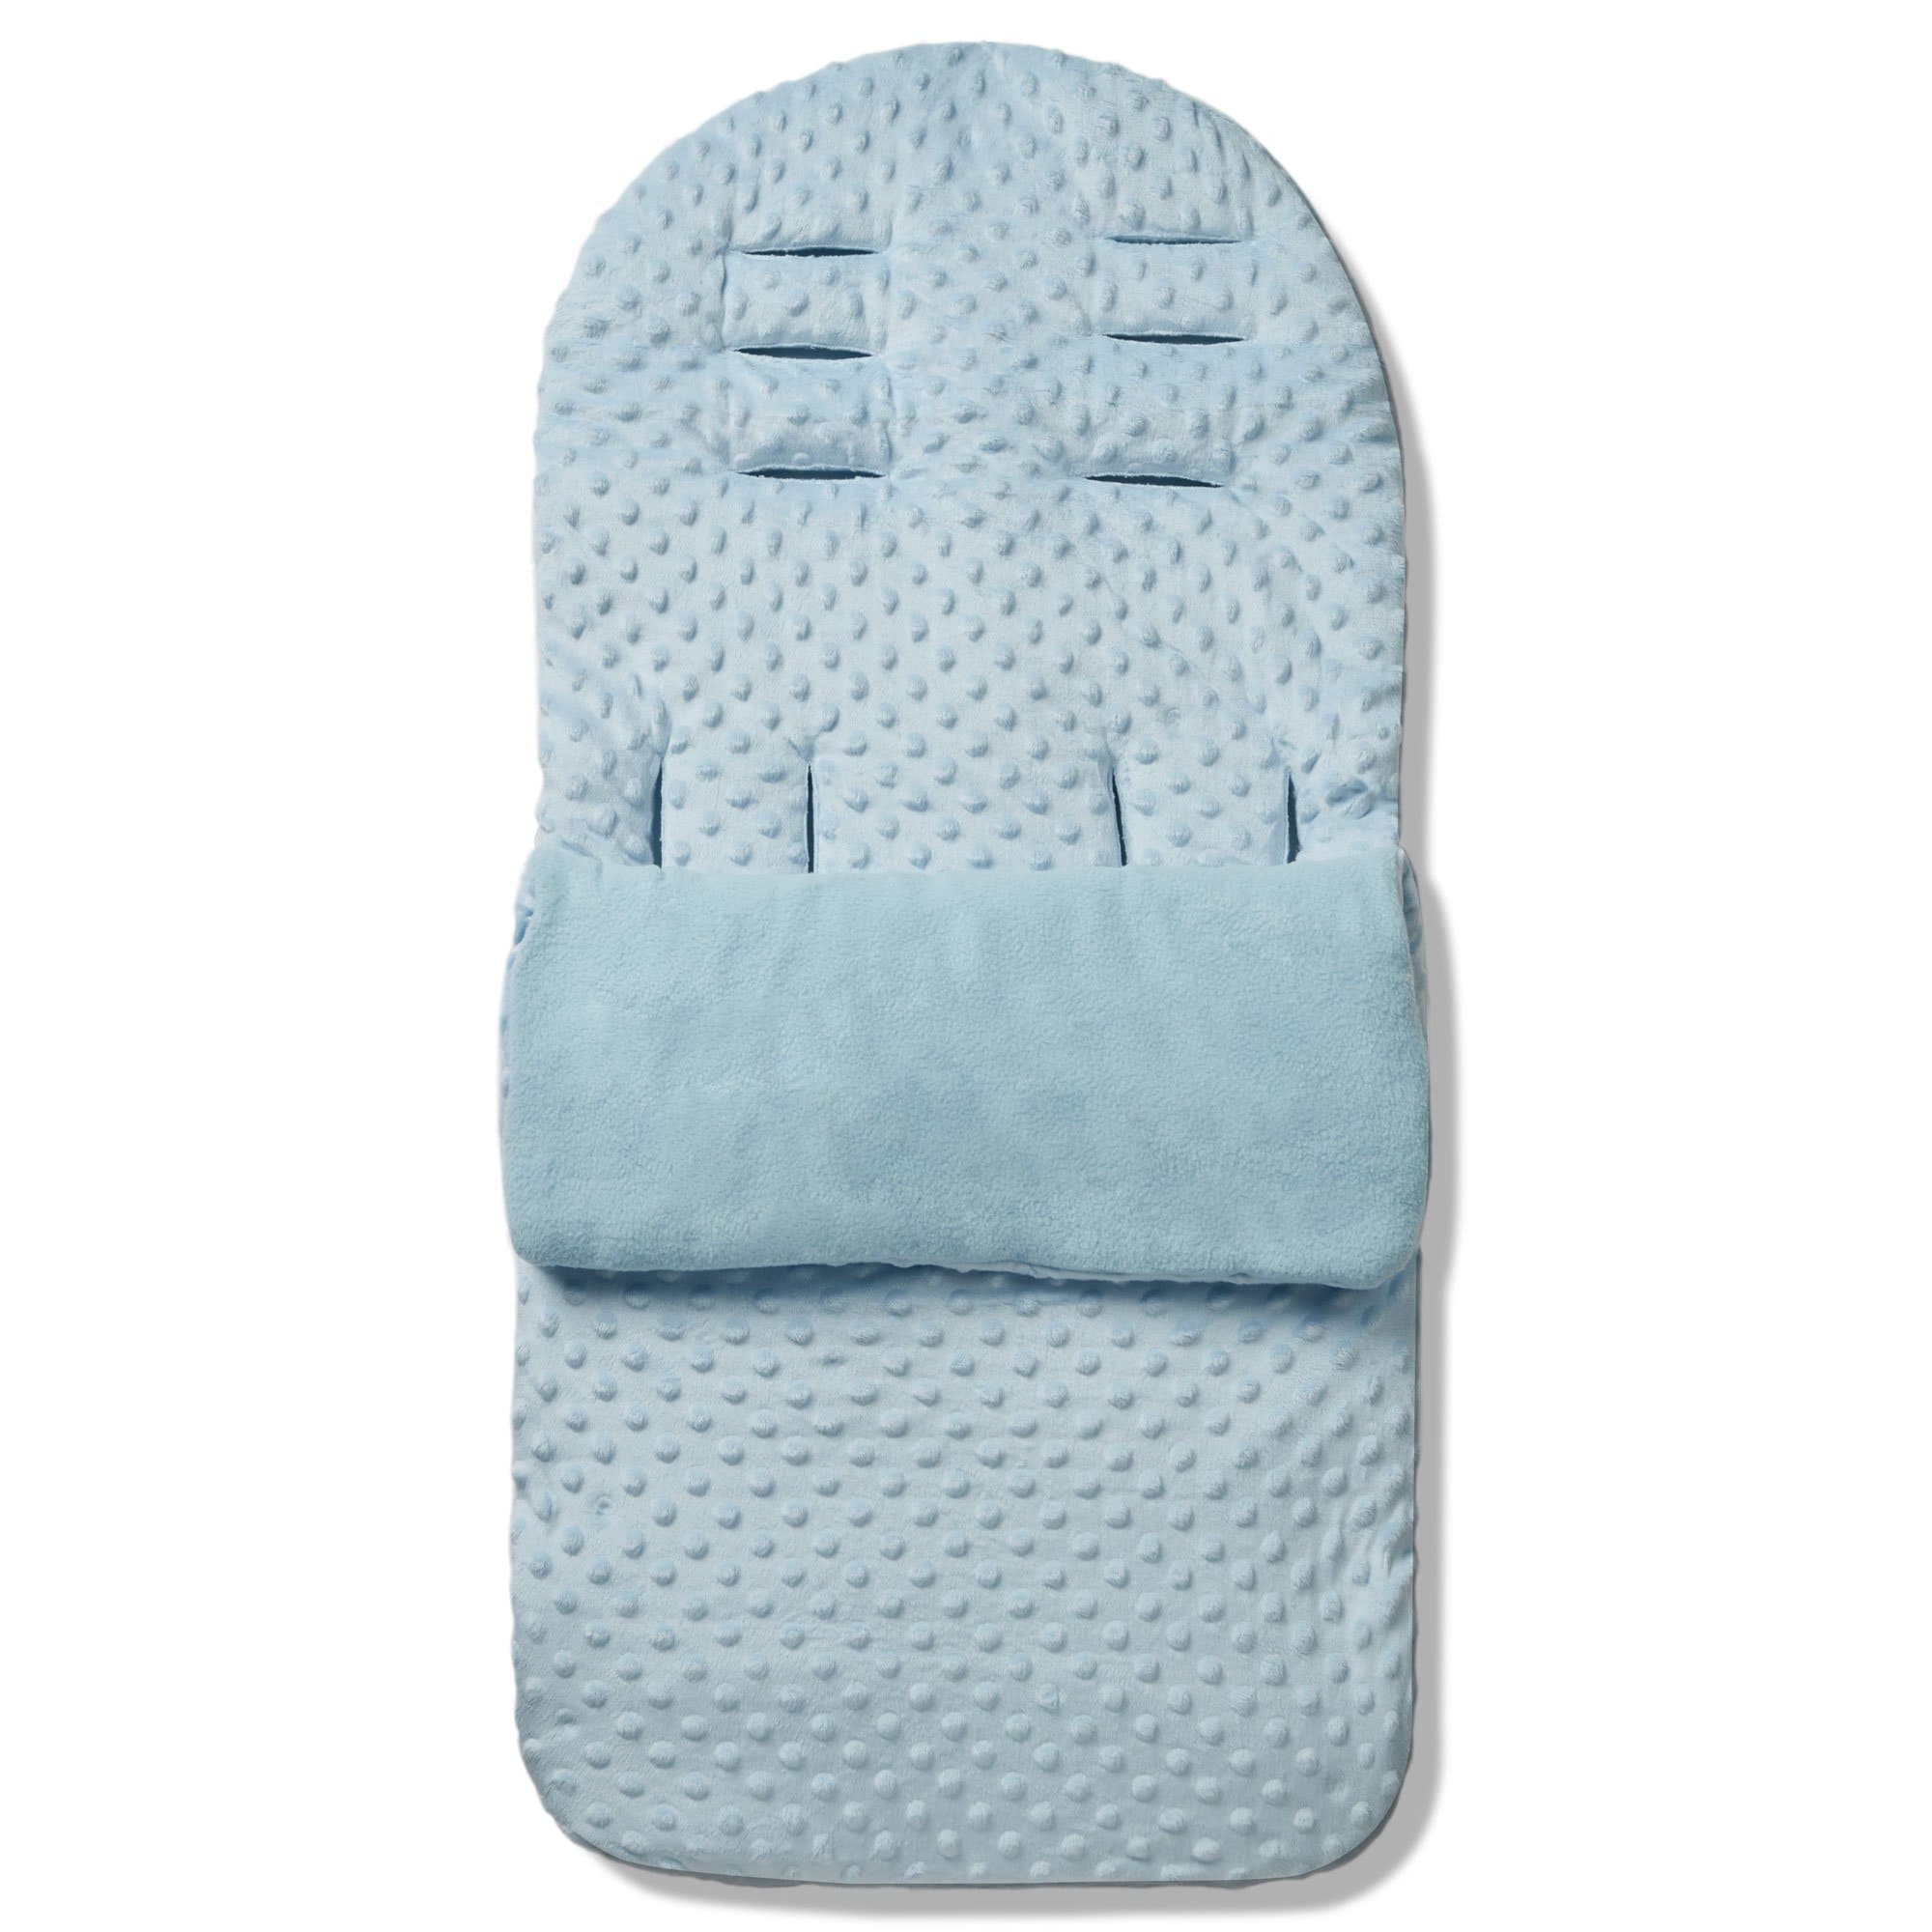 Dimple Footmuff / Cosy Toes Compatible with Formula - Blue / Fits All Models | For Your Little One